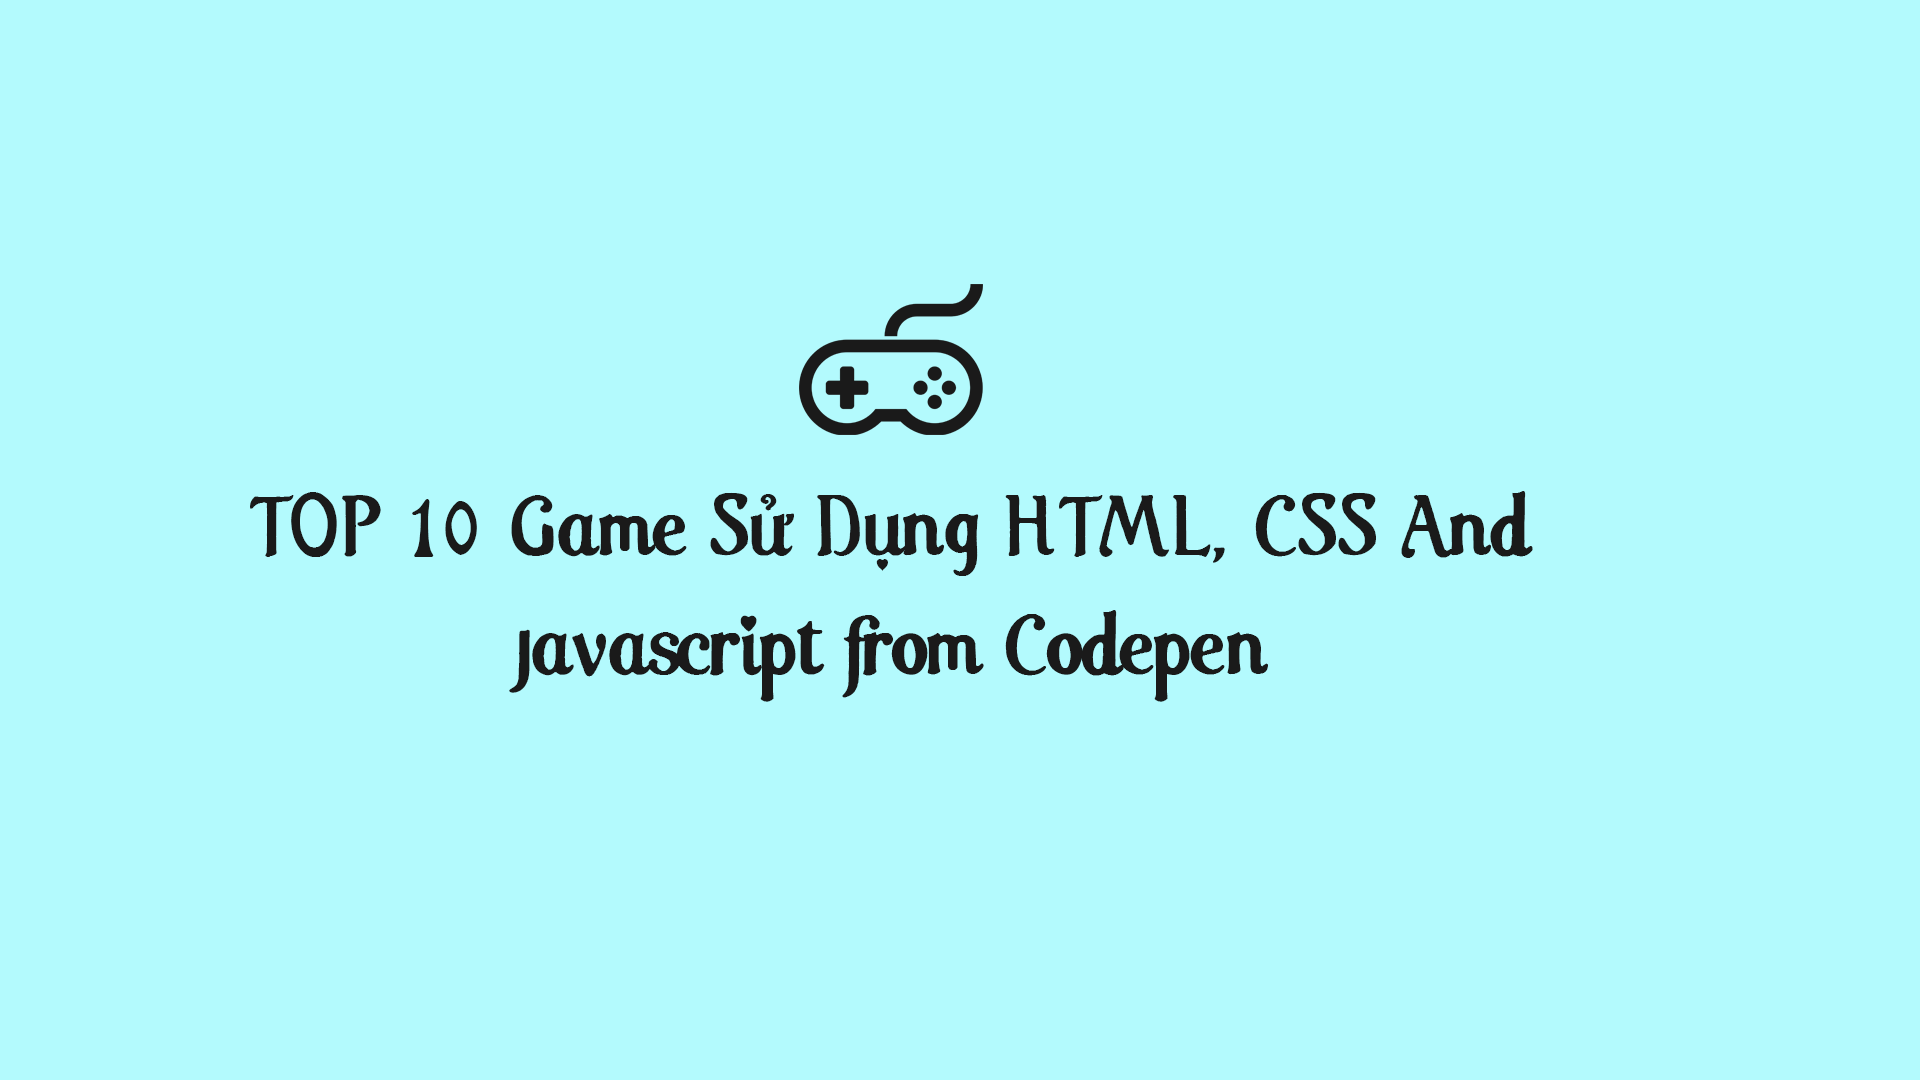 TOP 10 Game Su Dung HTML CSS And Javascript from